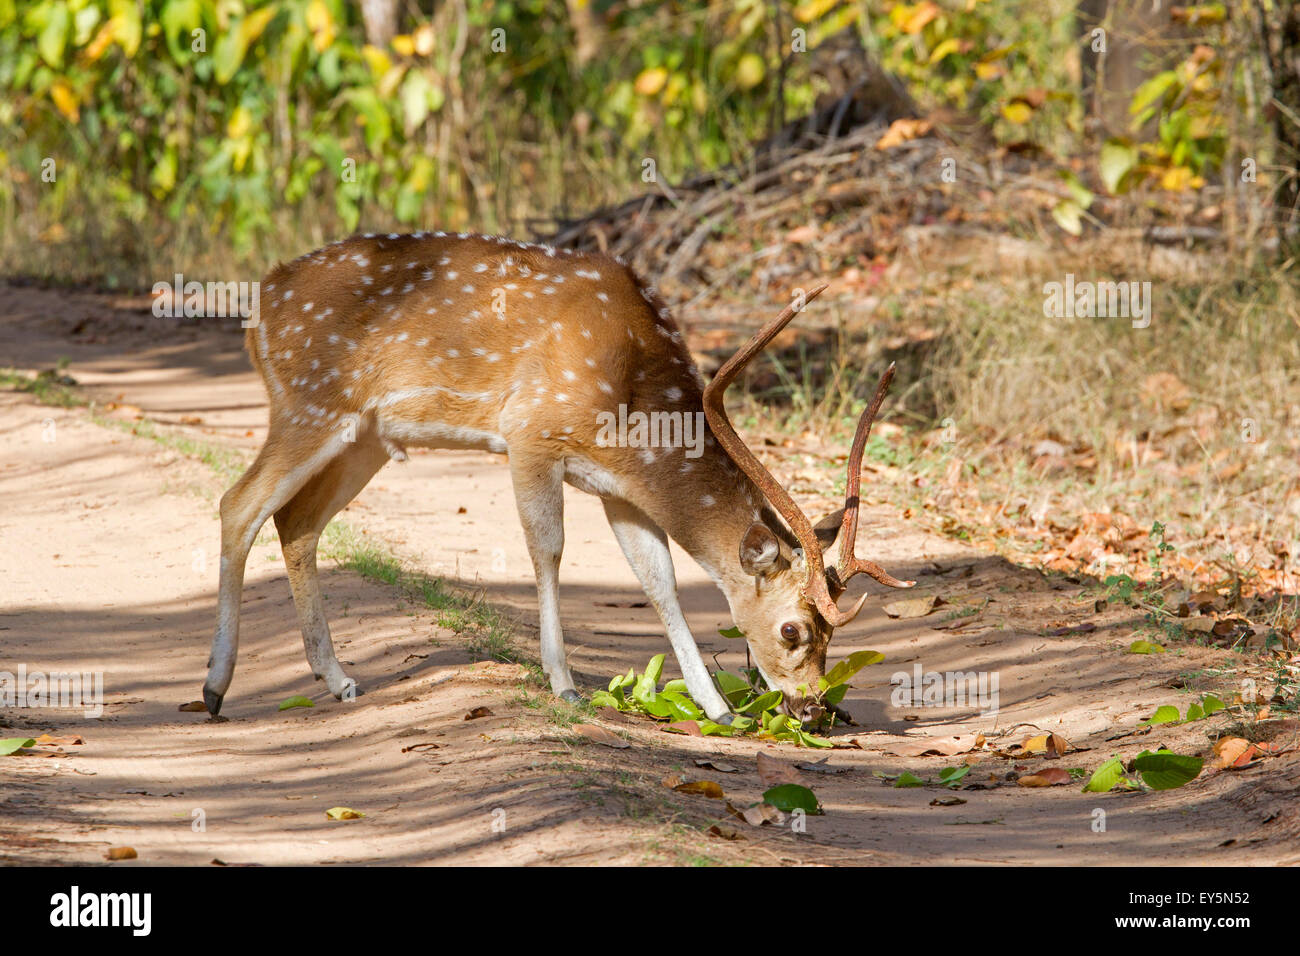 Axis deer eating on a track - Bandhavgarh NP India Stock Photo